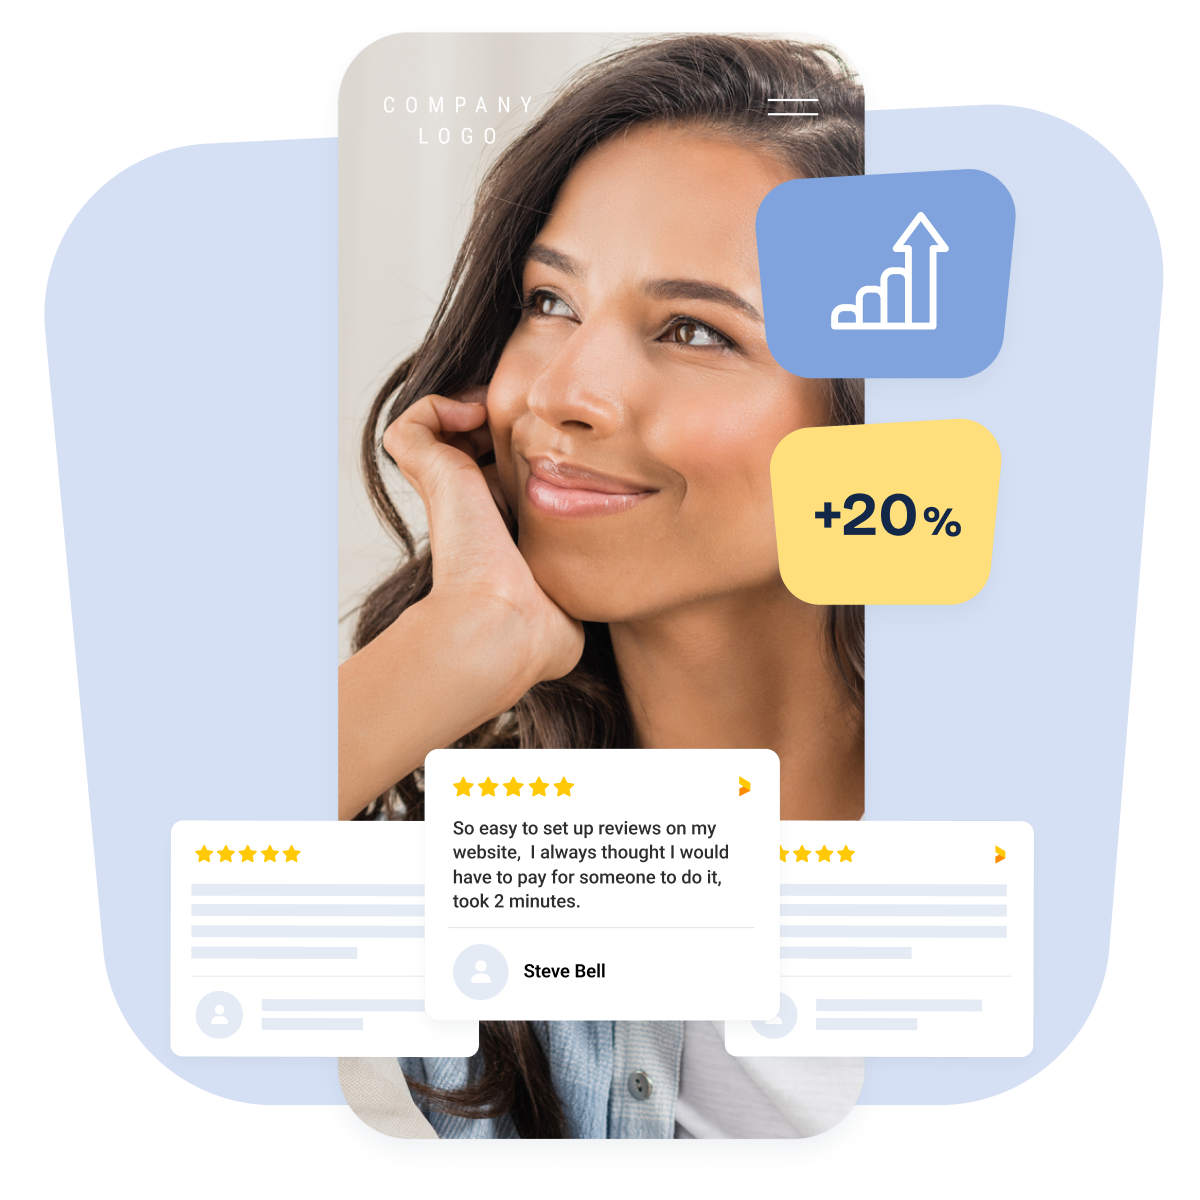 boost your website up to 20% by adding reviews